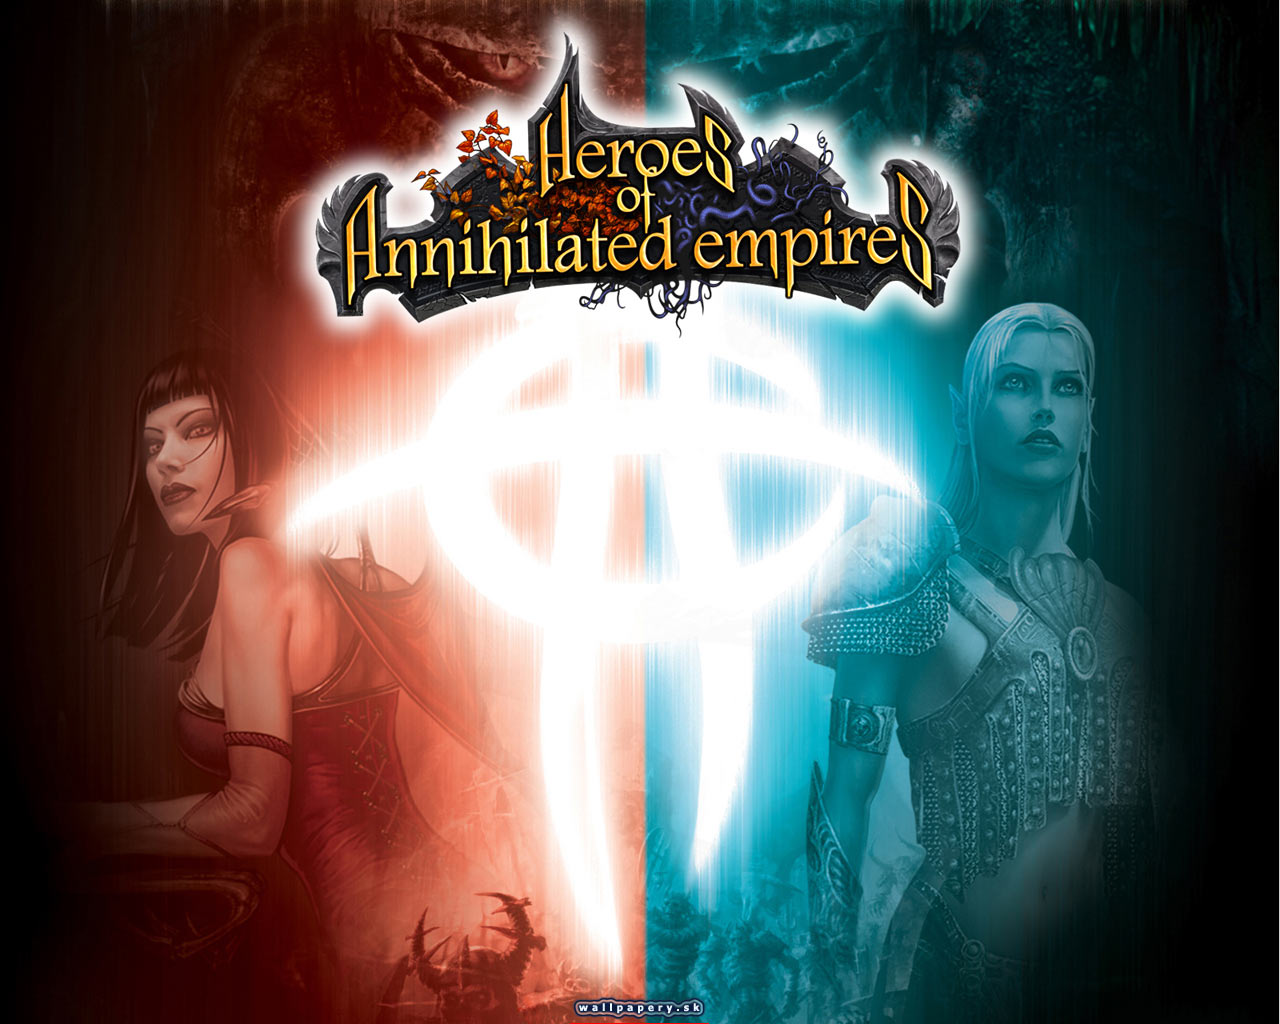 Heroes of annihilated empires steam фото 118